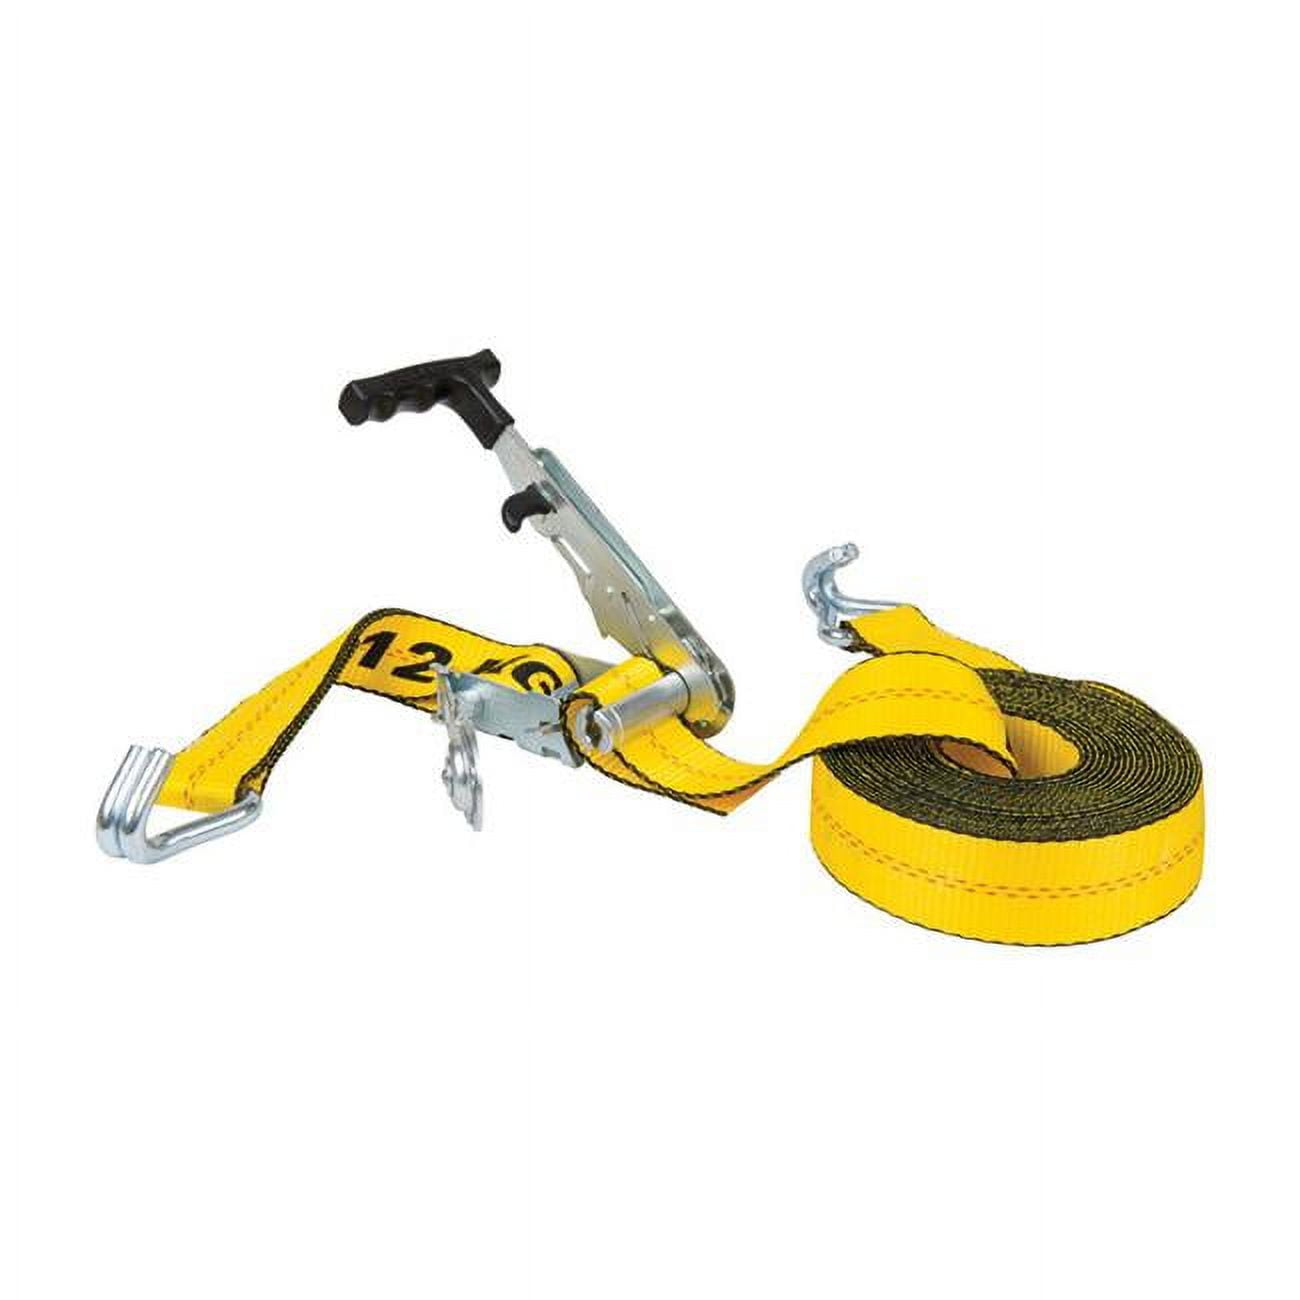 8015815 2 In. X 27 Ft. Yellow Jj Tie Down With Ratchet - 3333 Lbs